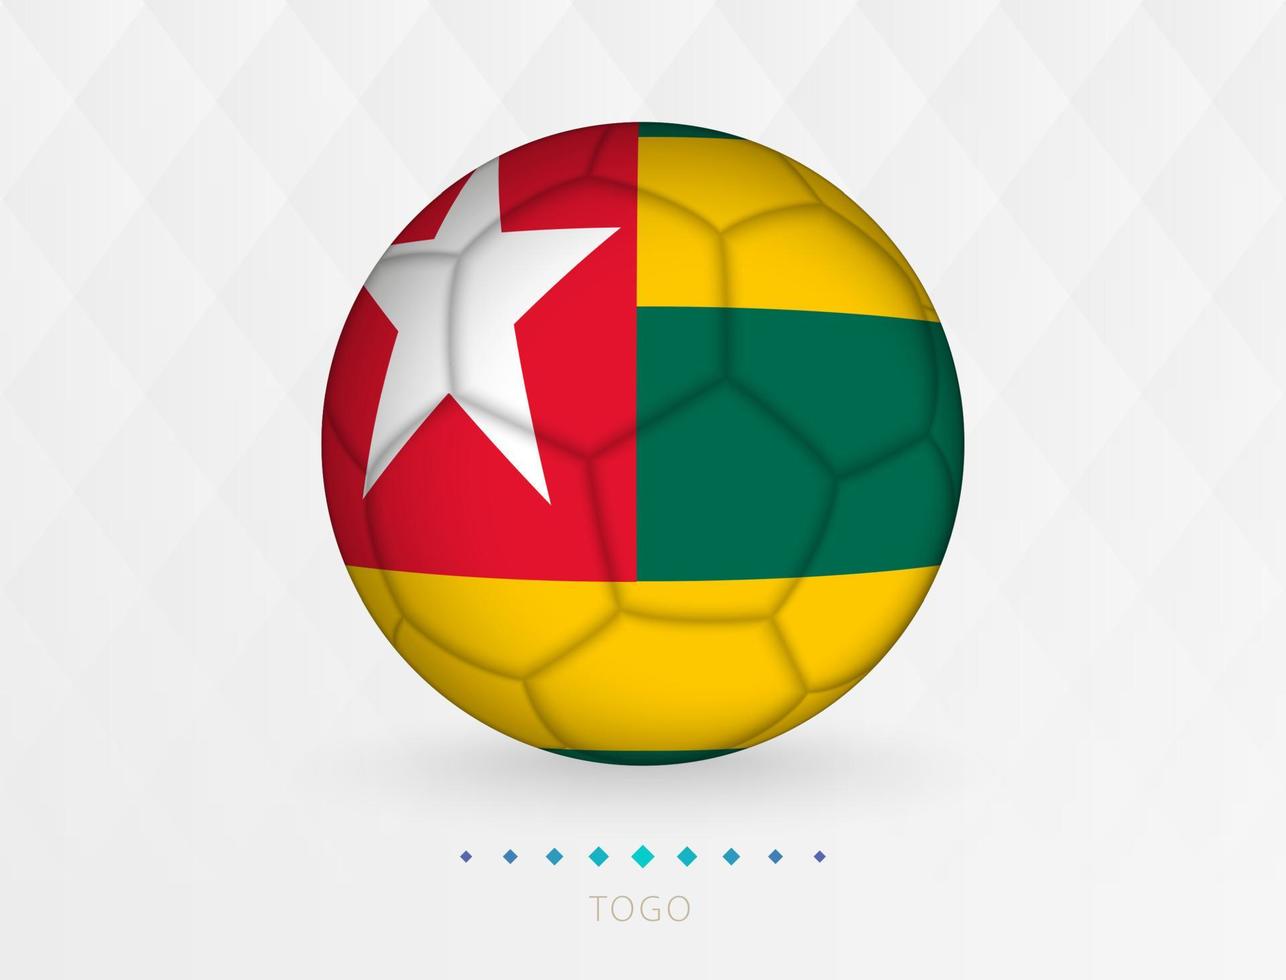 Football ball with Togo flag pattern, soccer ball with flag of Togo national team. vector